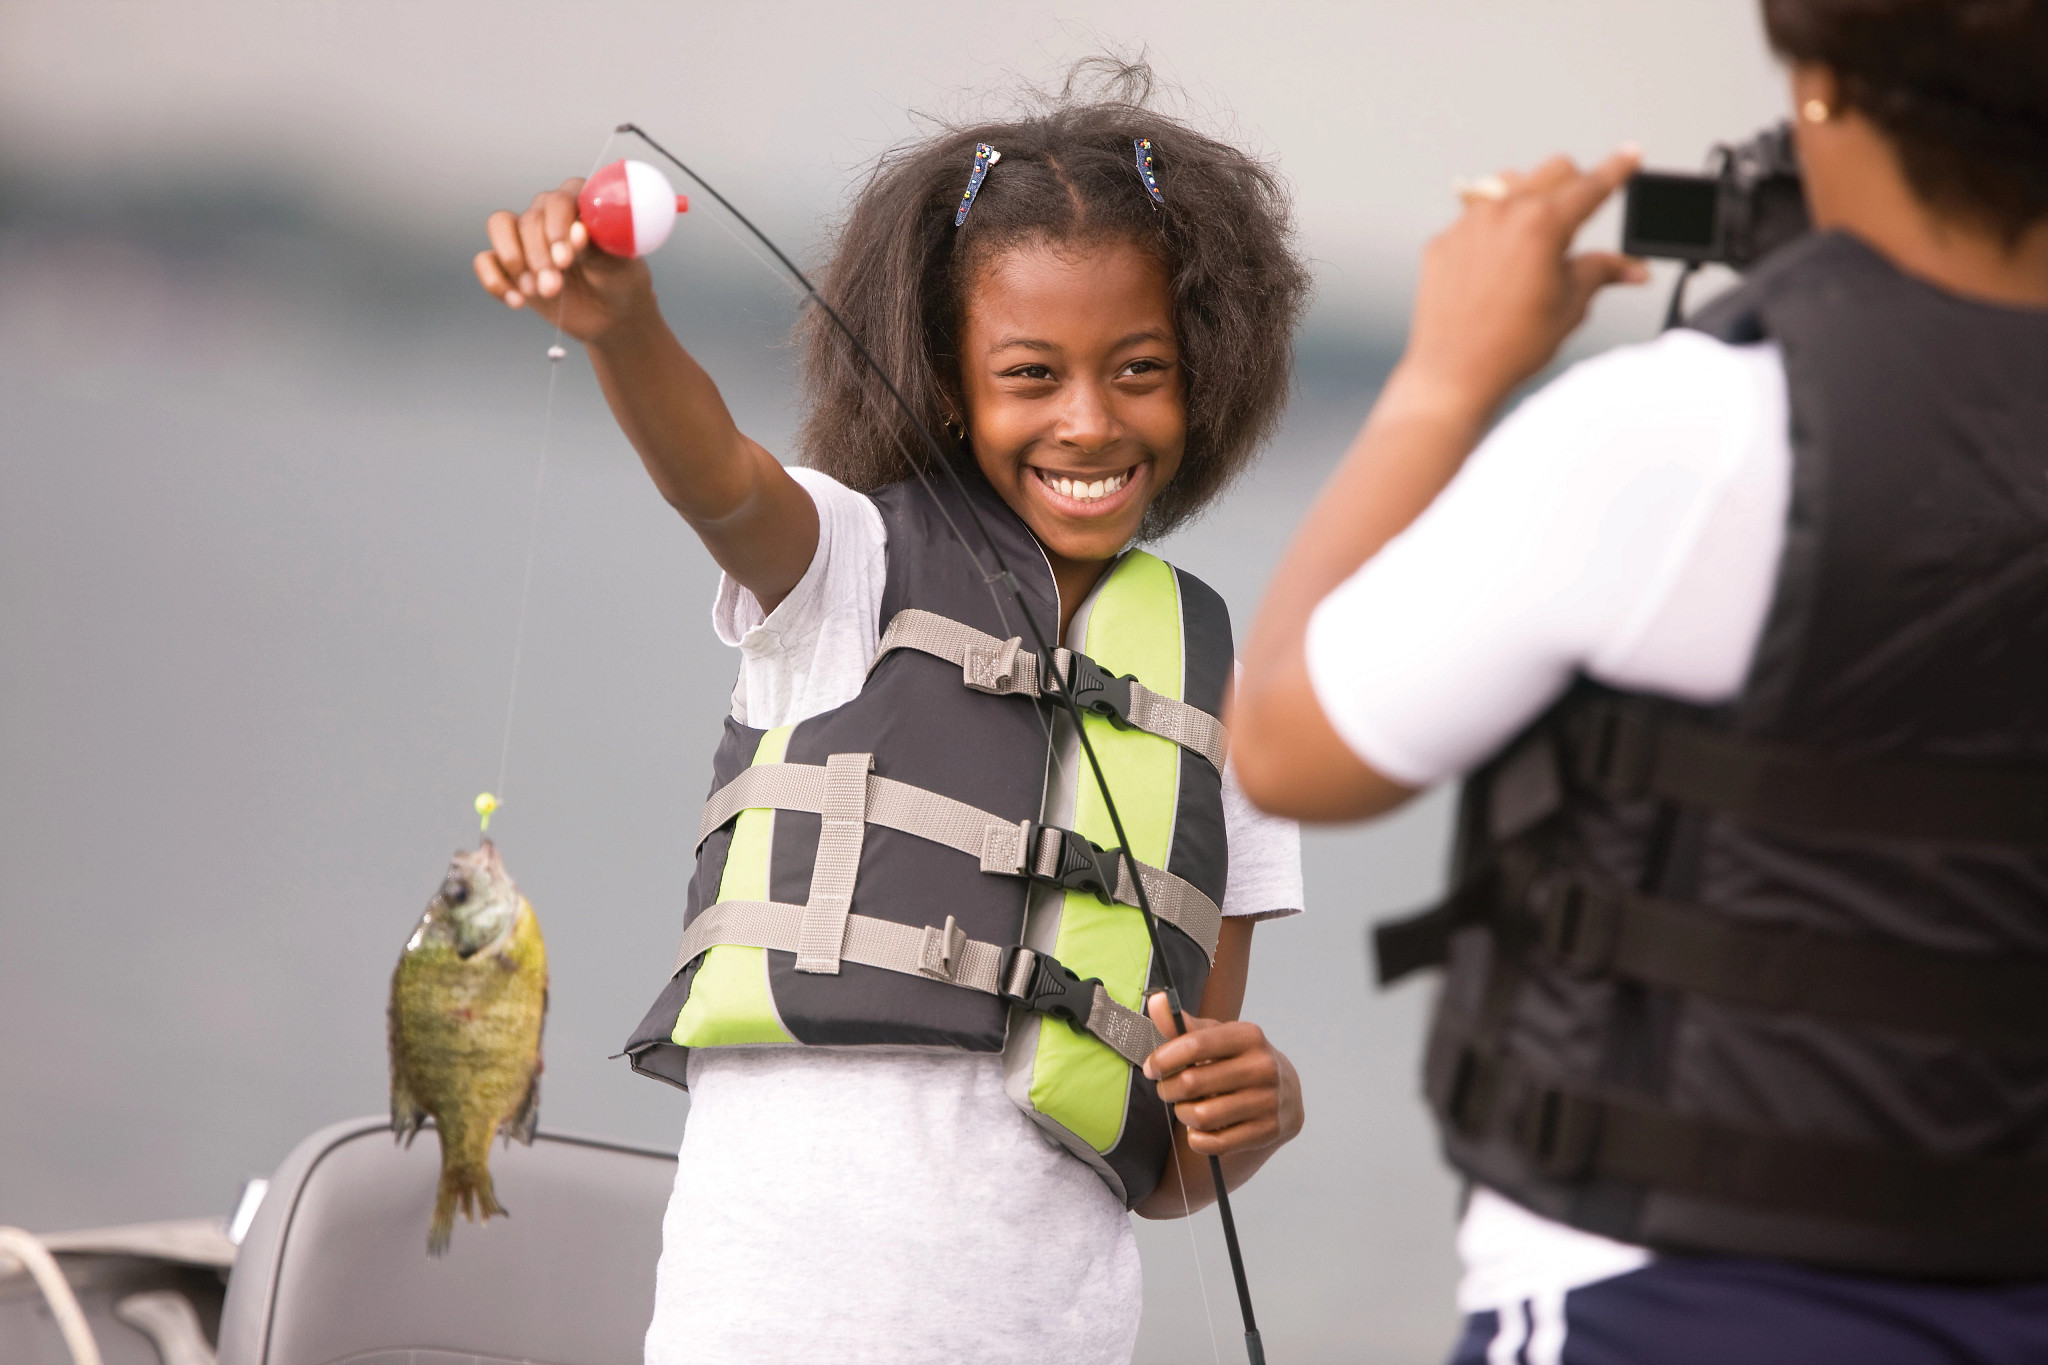 A young black female angler holds up a fish while an older woman takes a photo of her.